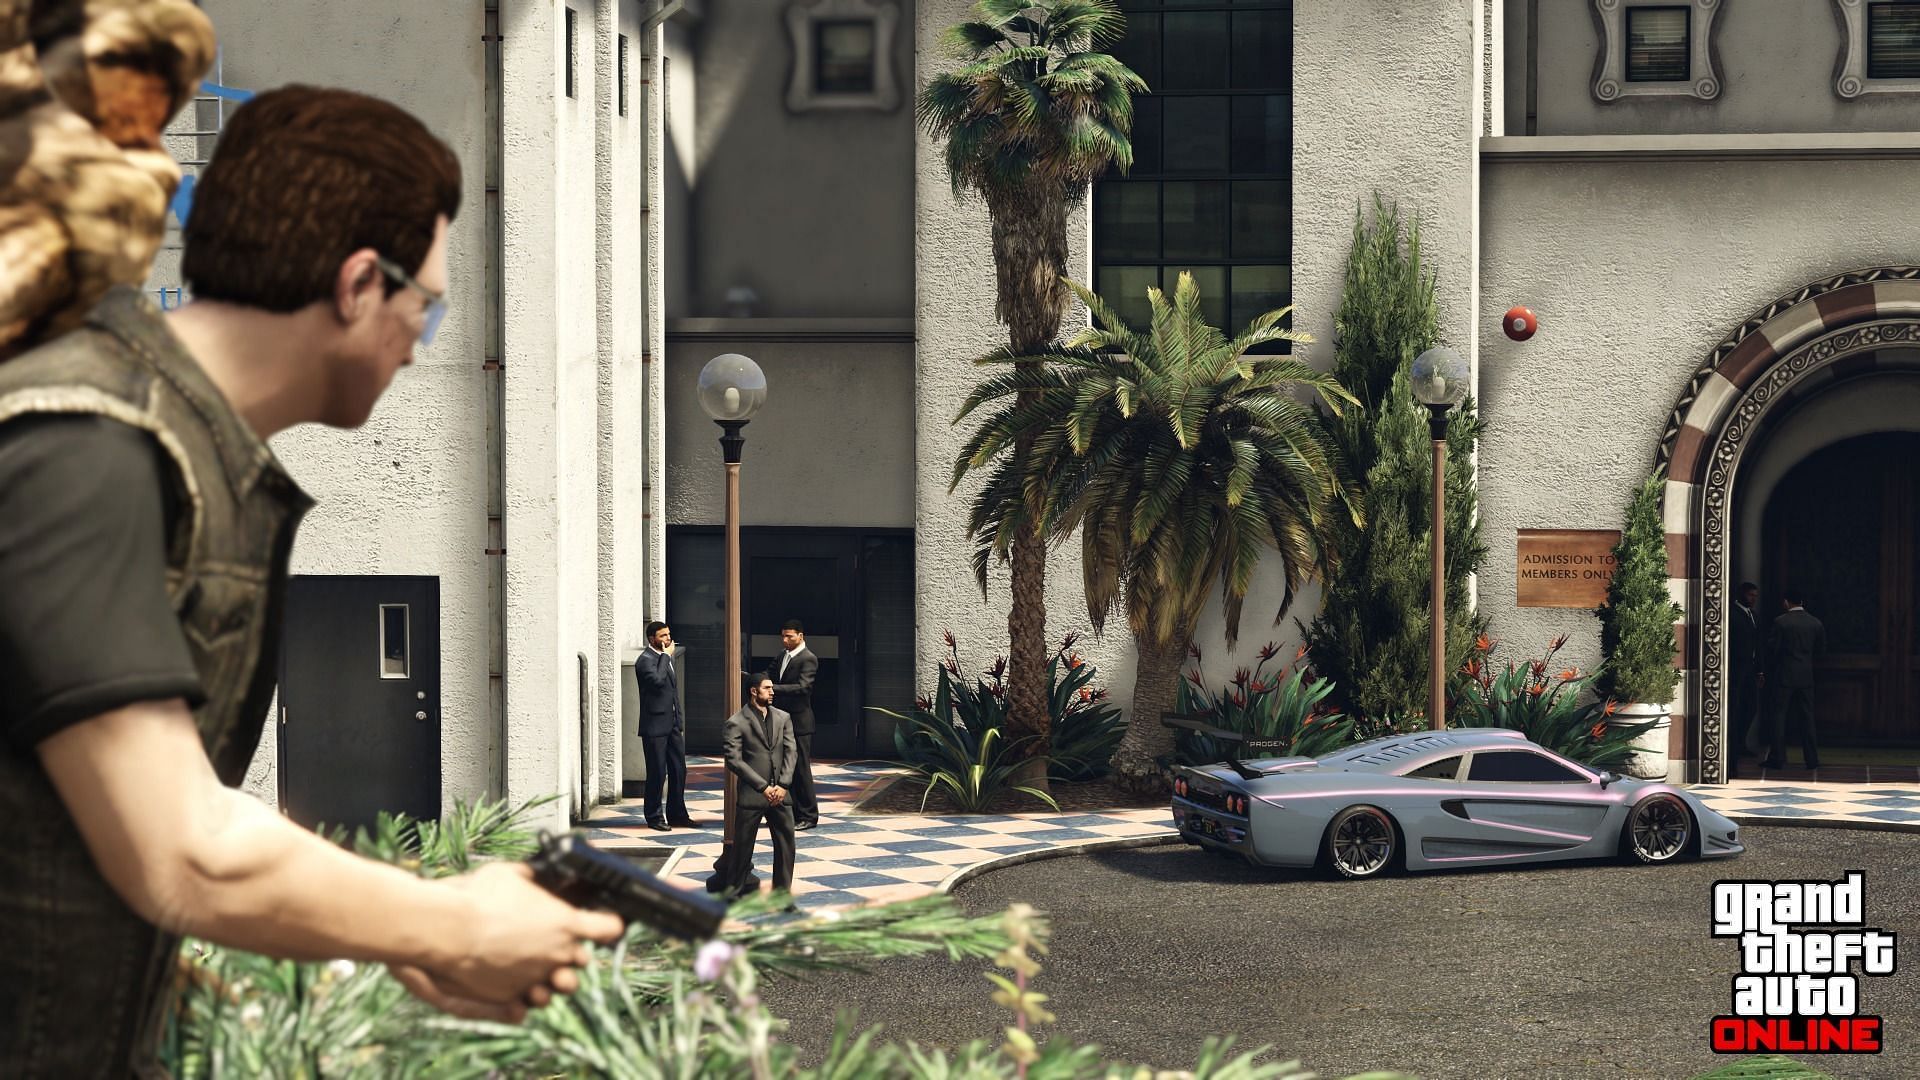 Contact Missions are a great way to earn money in GTA Online (Image via Rockstar Games)